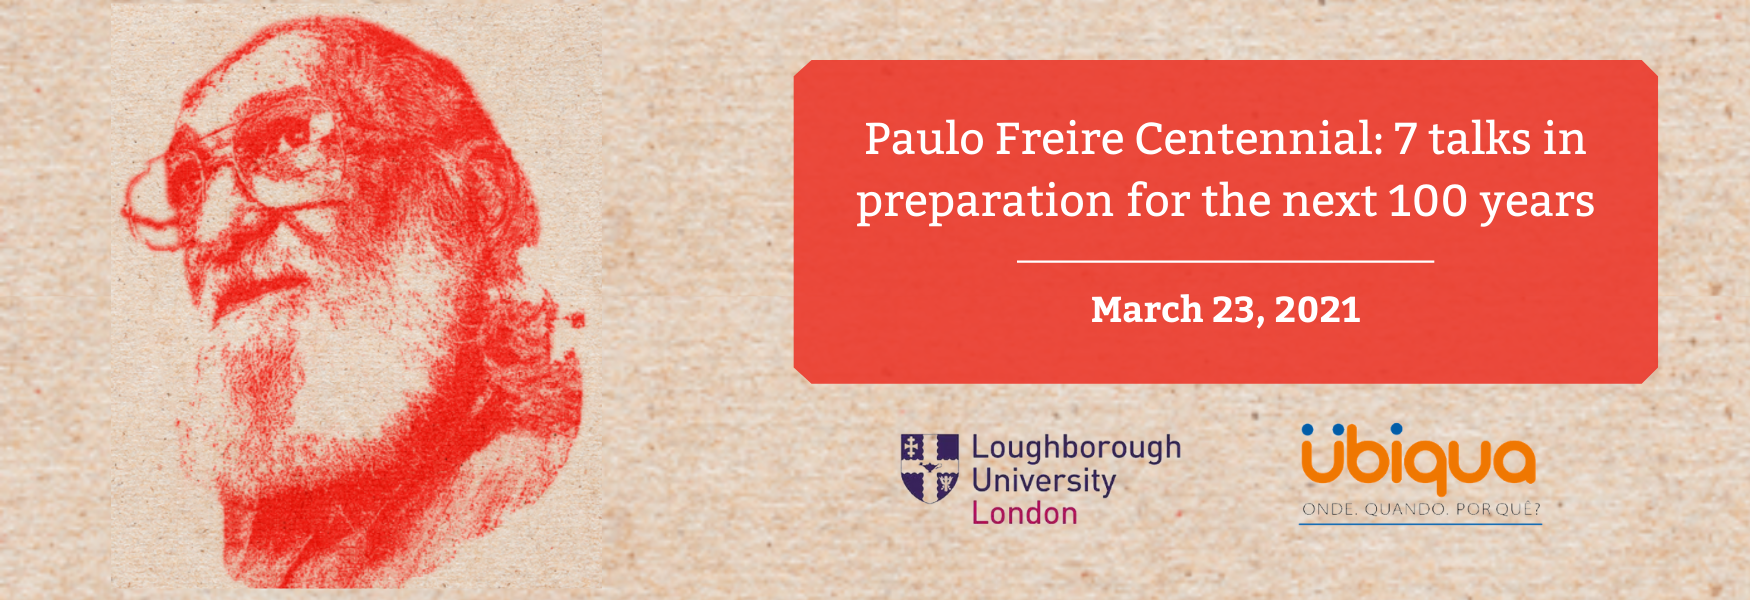 Paulo Freire Centennial: 7 talks in preparation for the next 100 years